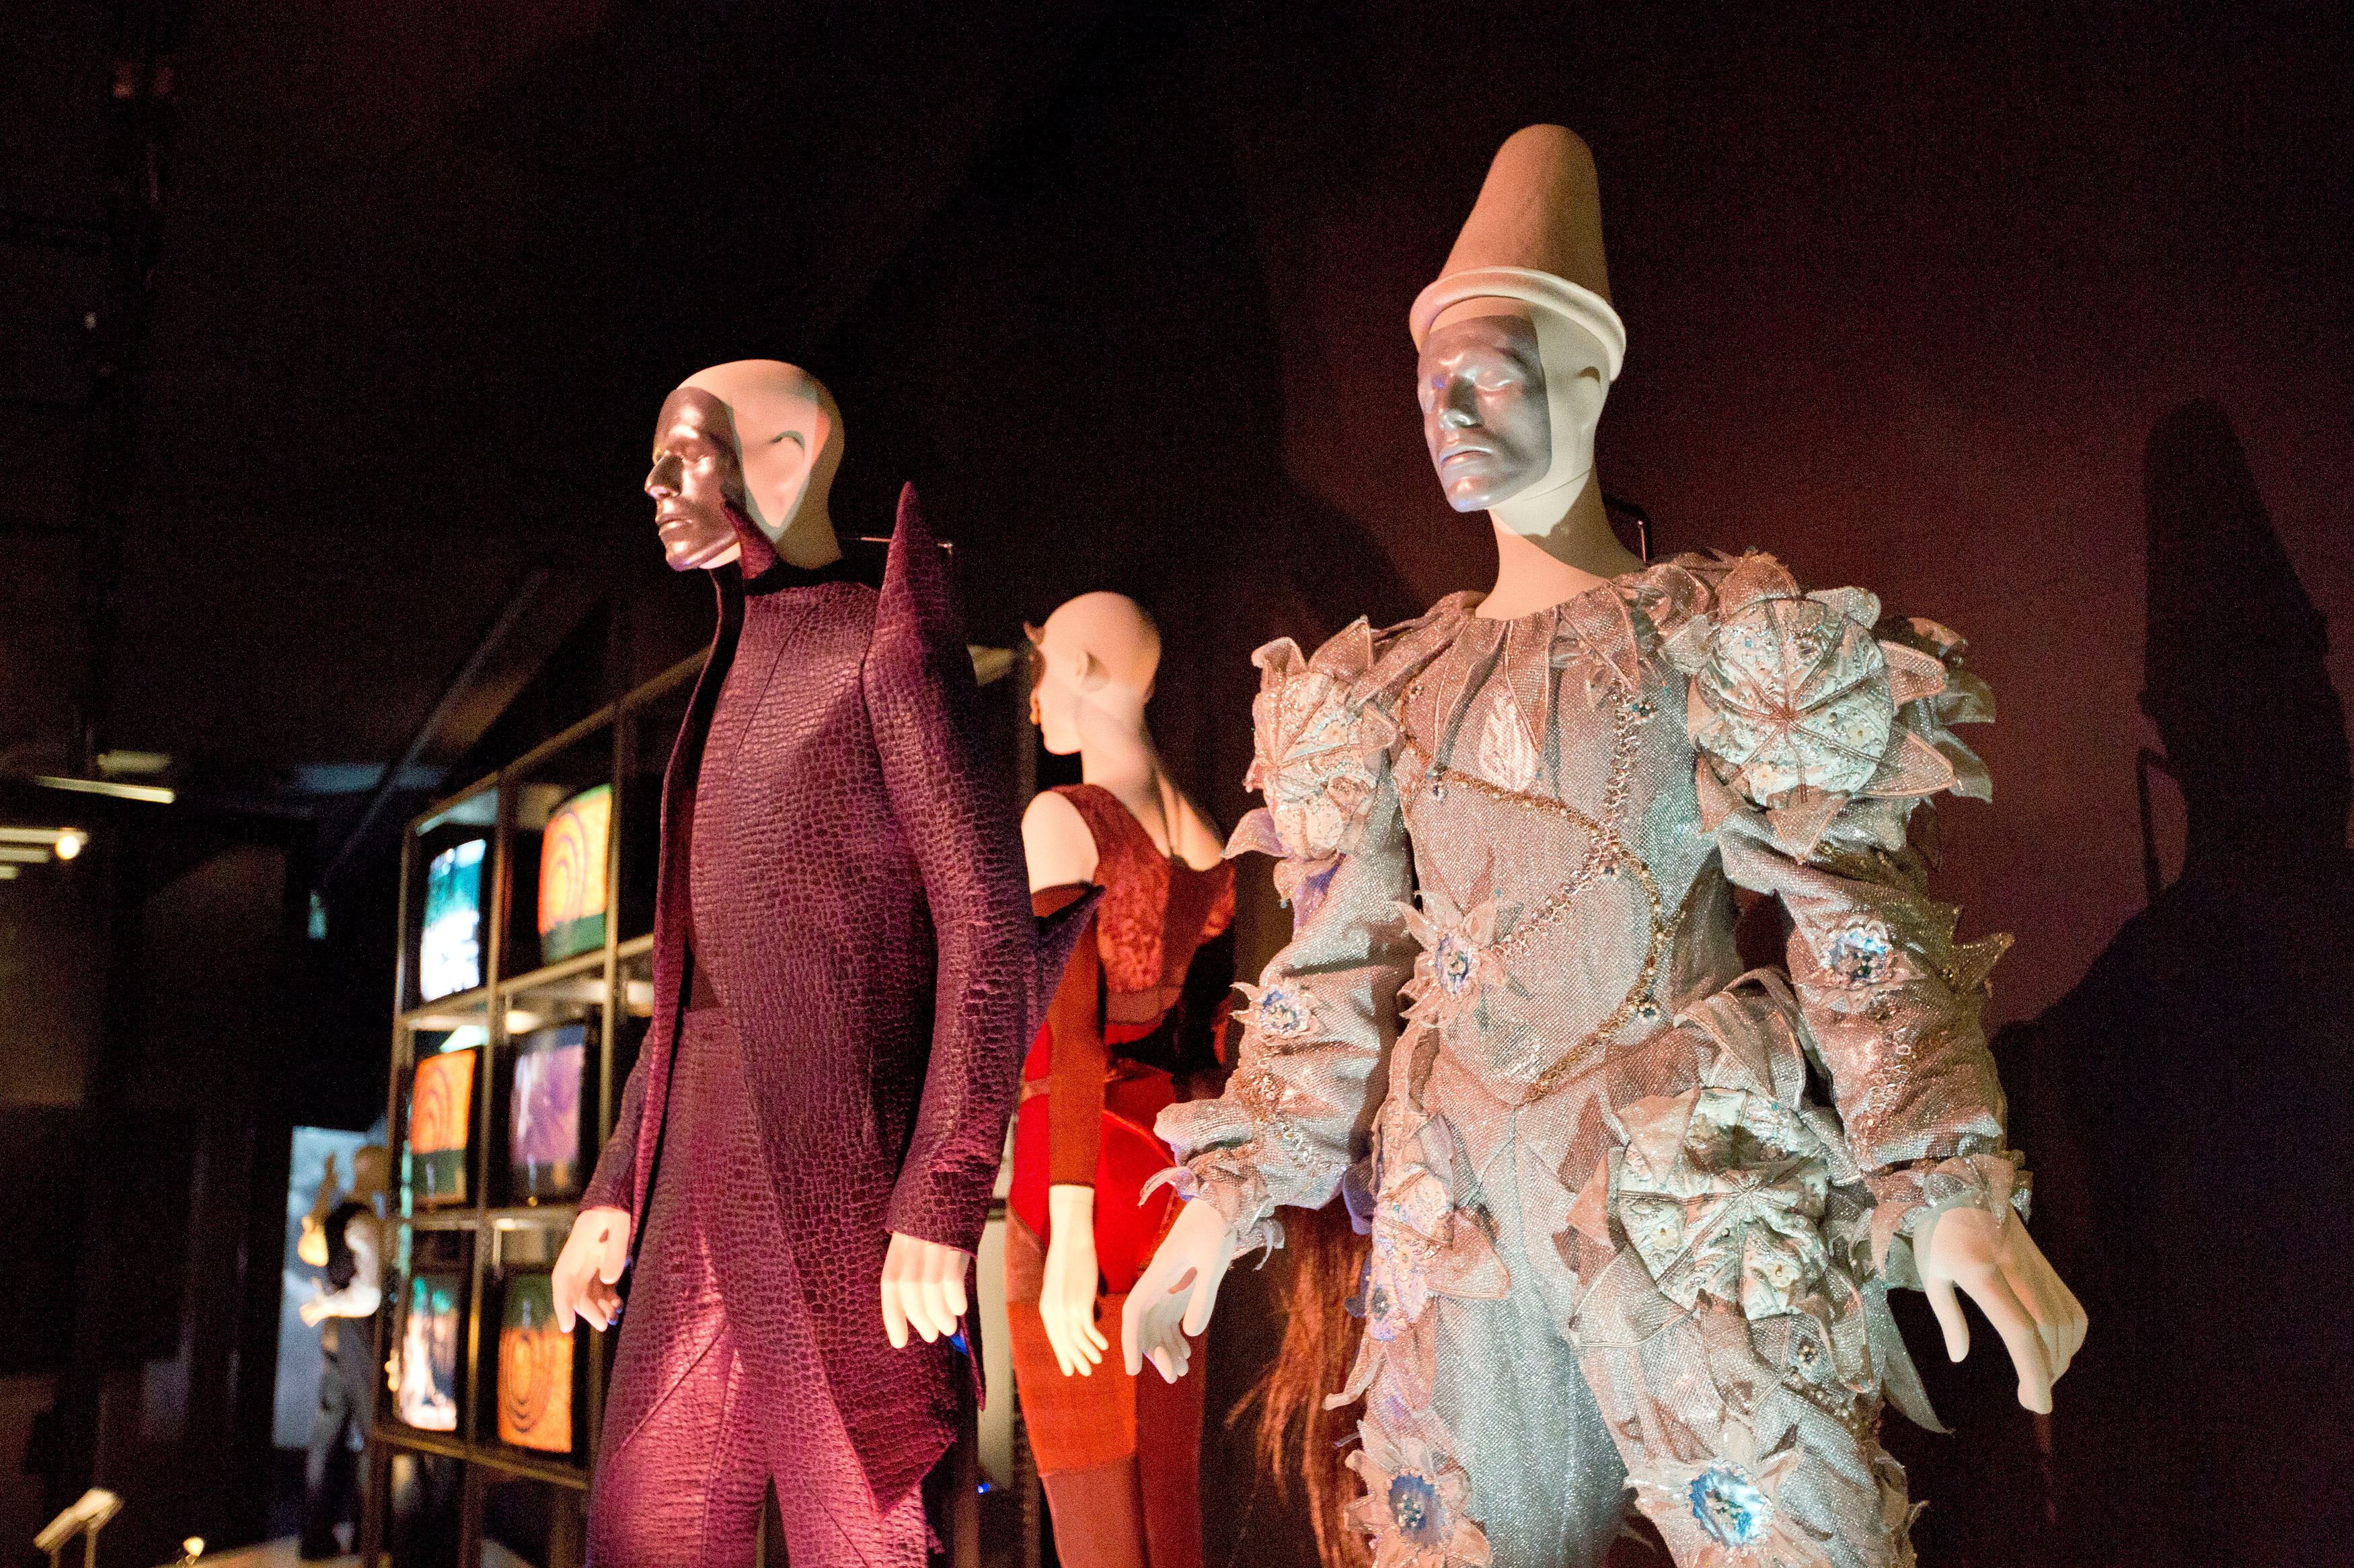 A variety of stage costumes worn by musician David Bowie are seen at the 